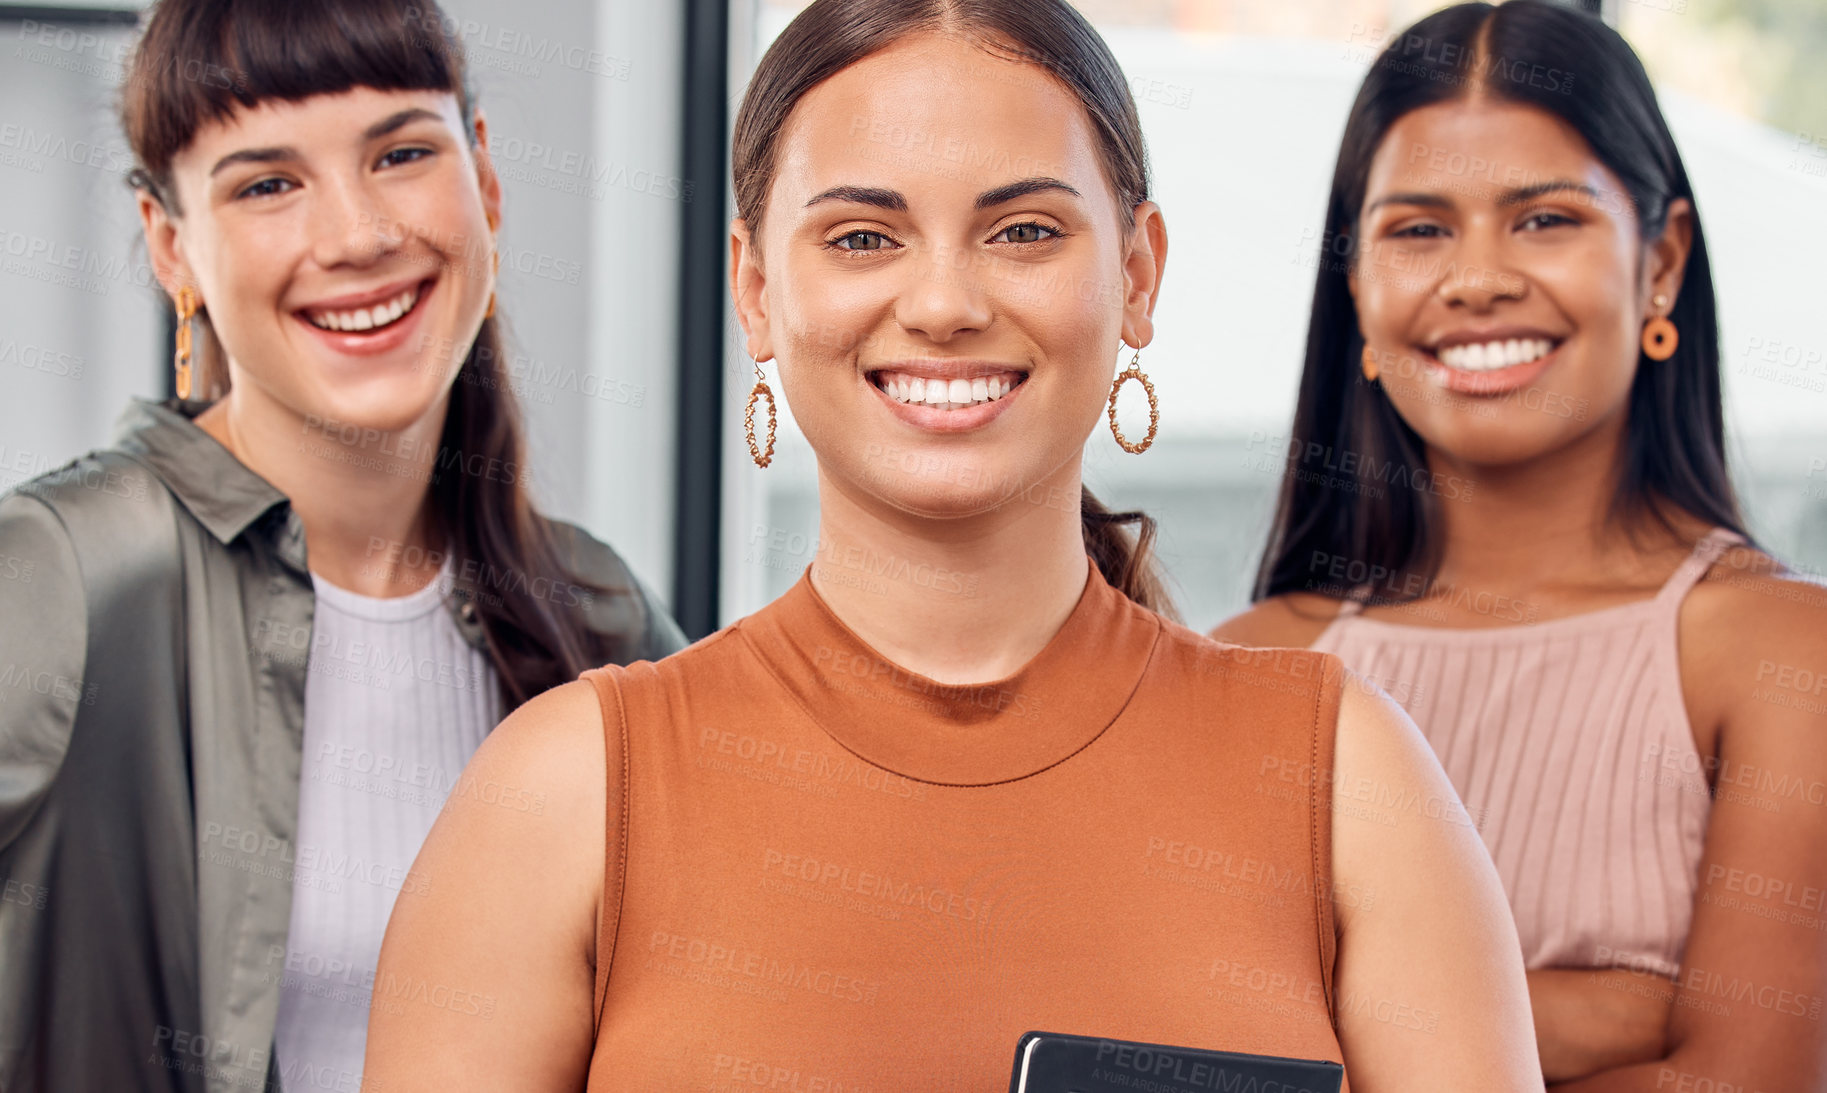 Buy stock photo Portrait of a group of businesswomen at the office